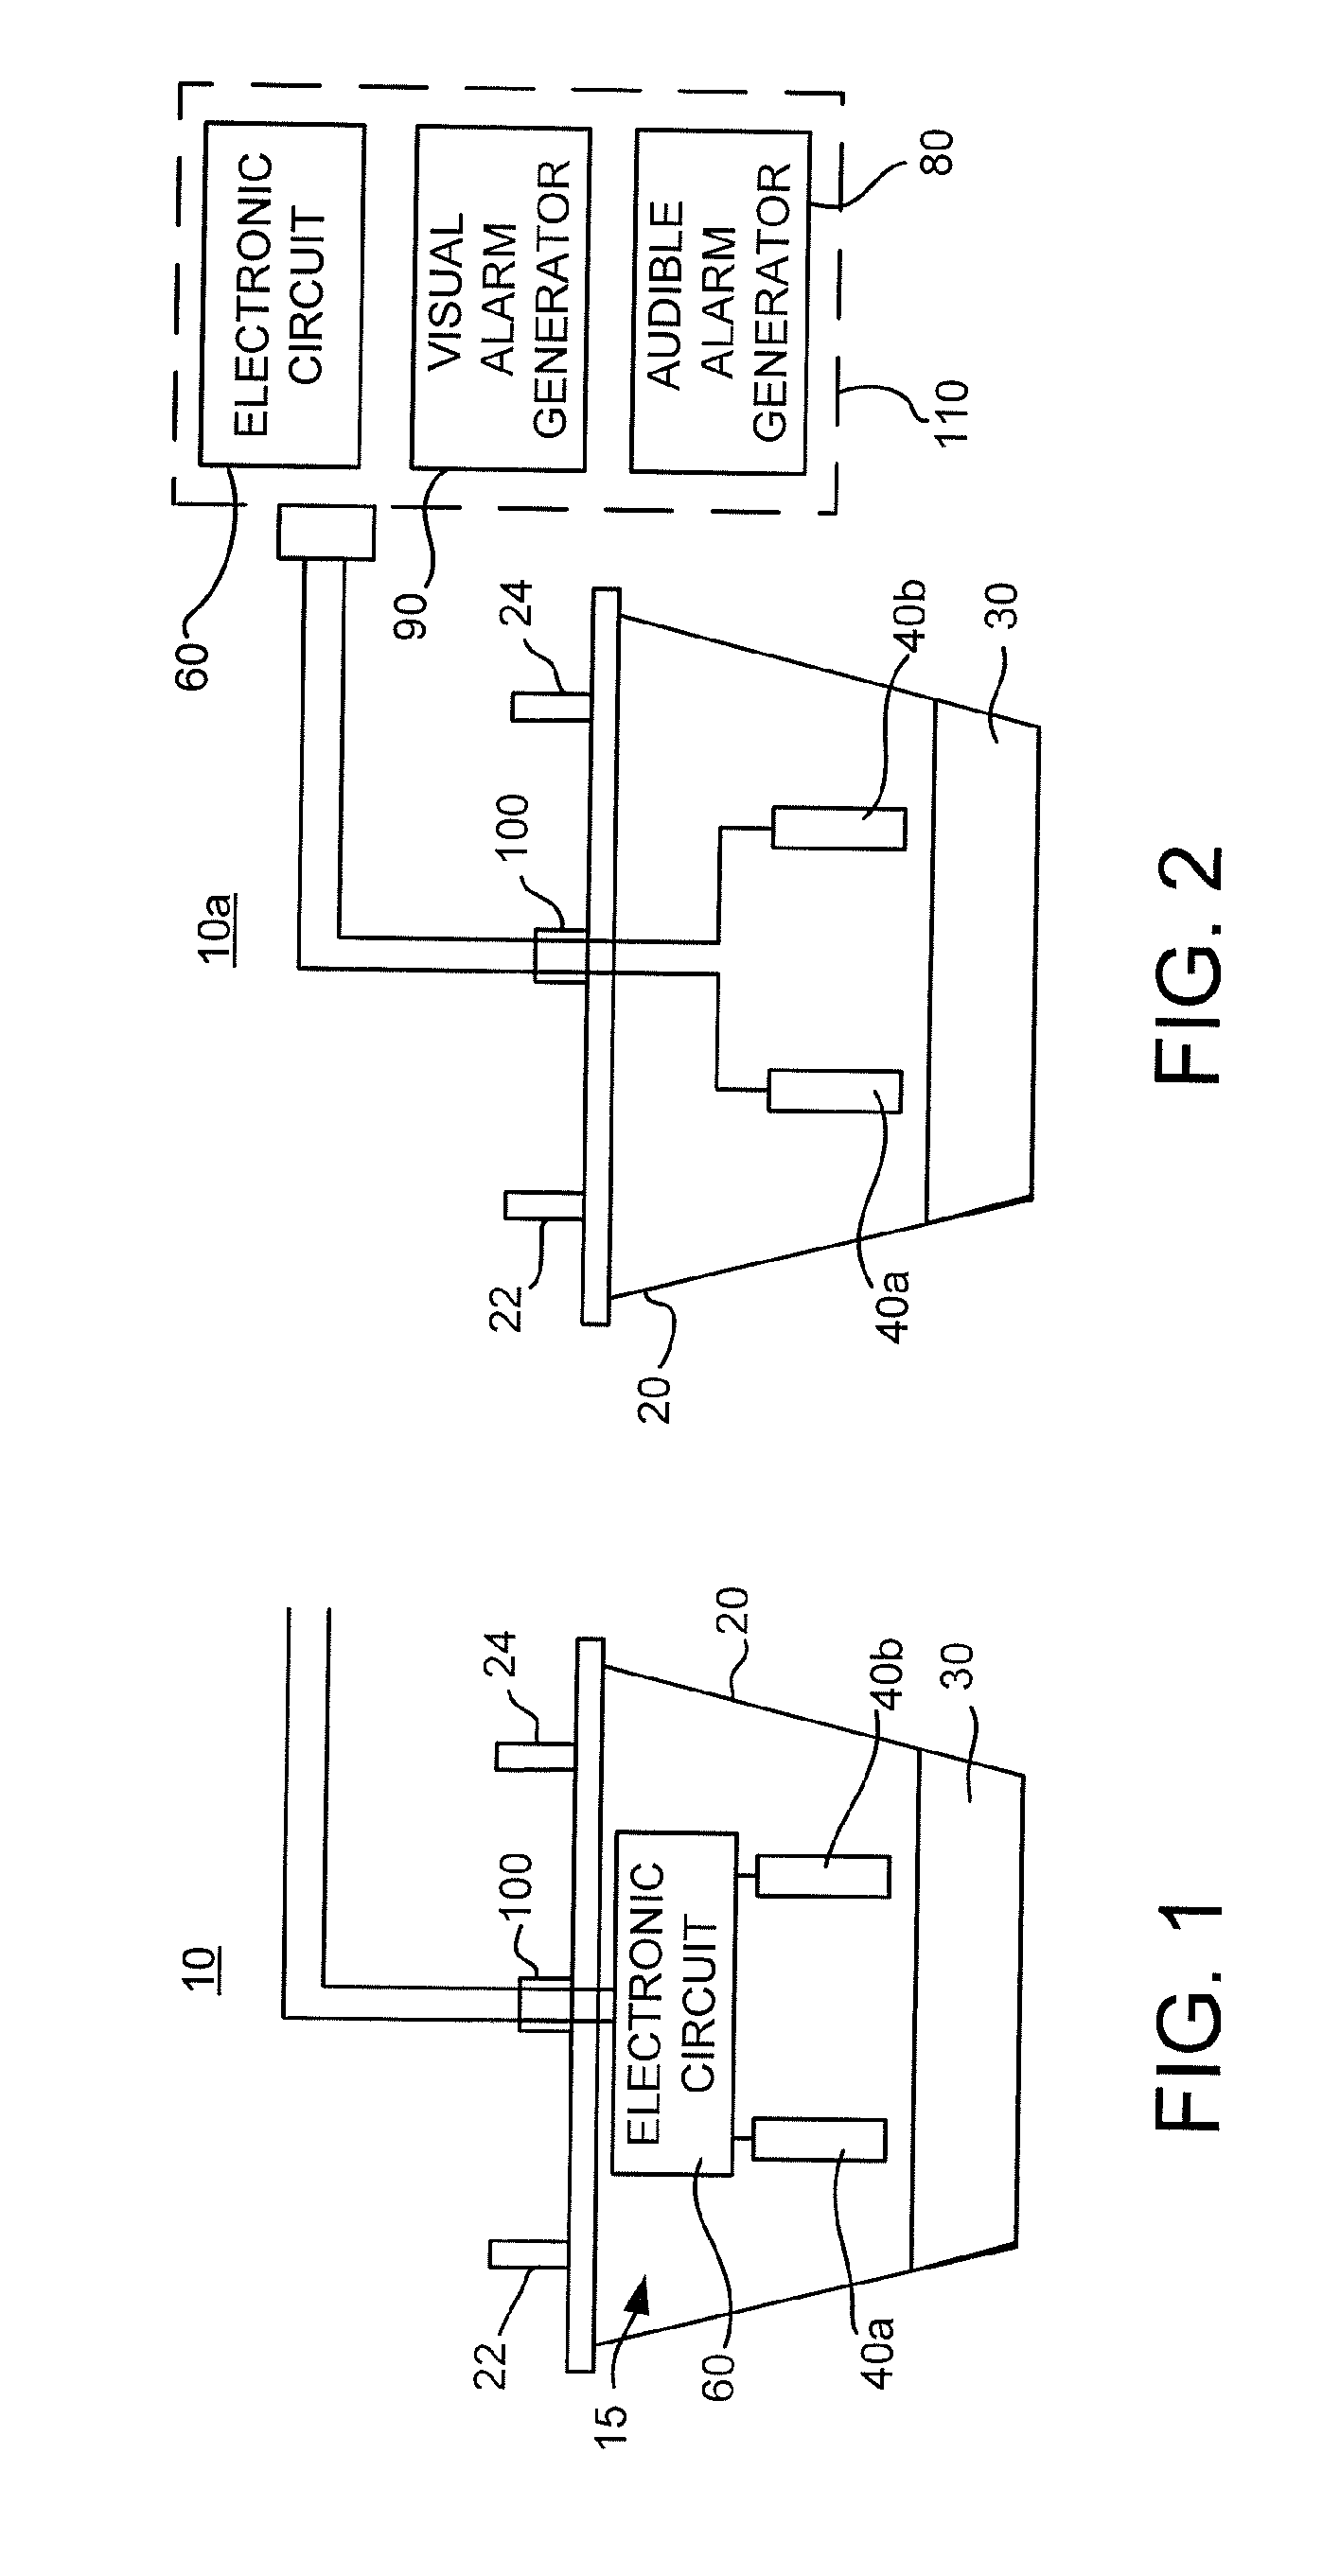 Fluid level sensor for a container of a negative pressure wound treatment system